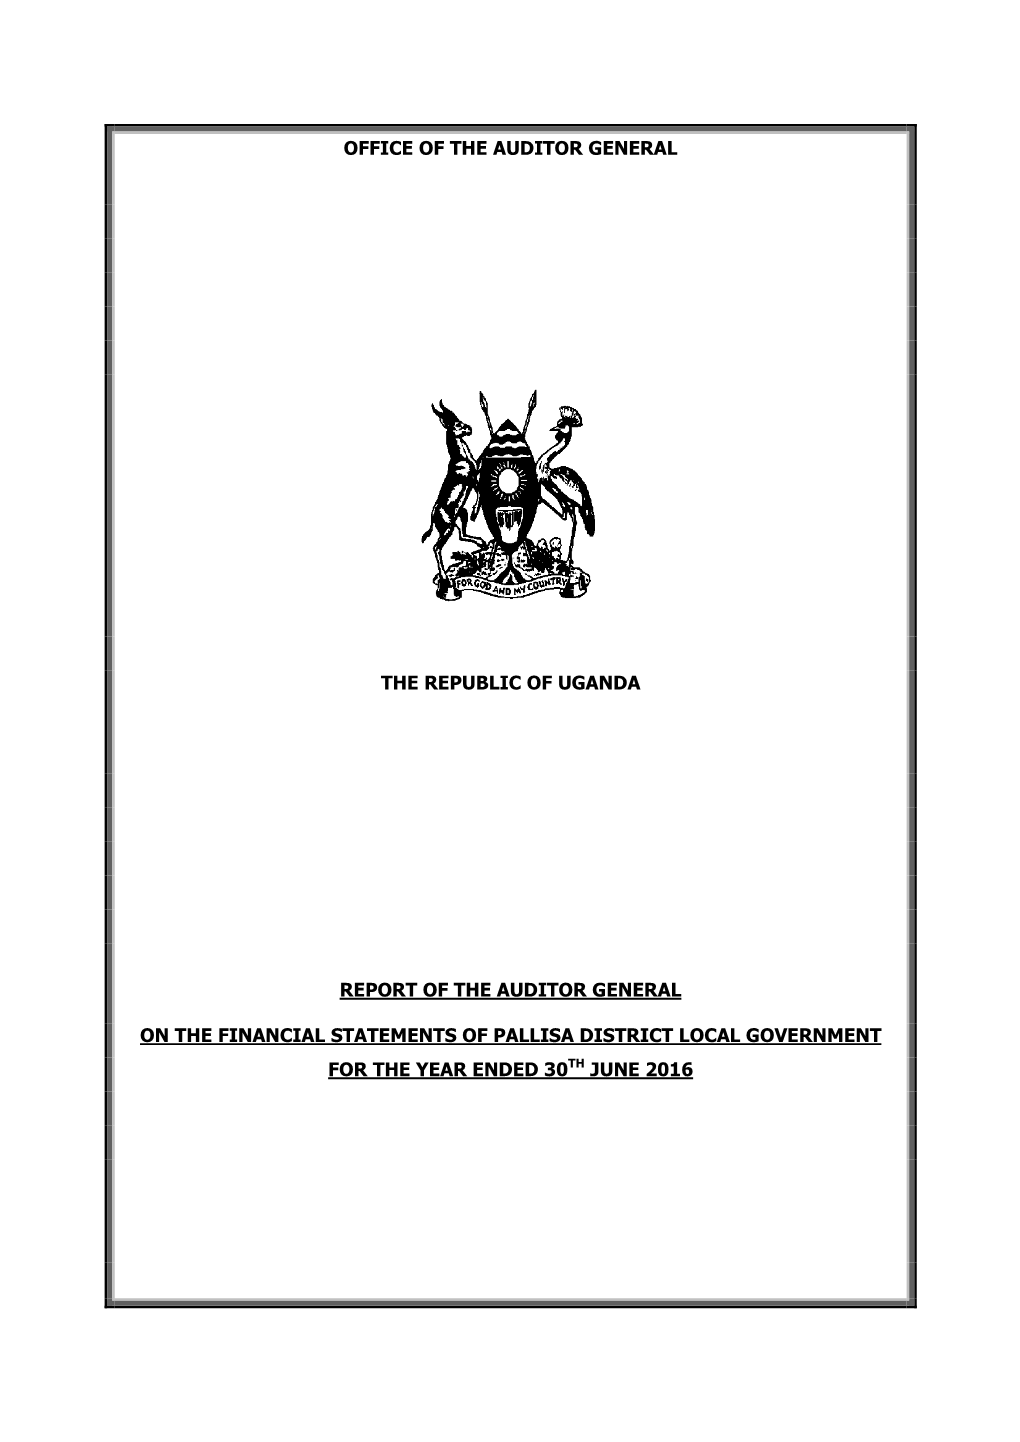 Office of the Auditor General the Republic of Uganda Report of the Auditor General on the Financial Statements of Pallisa Distri